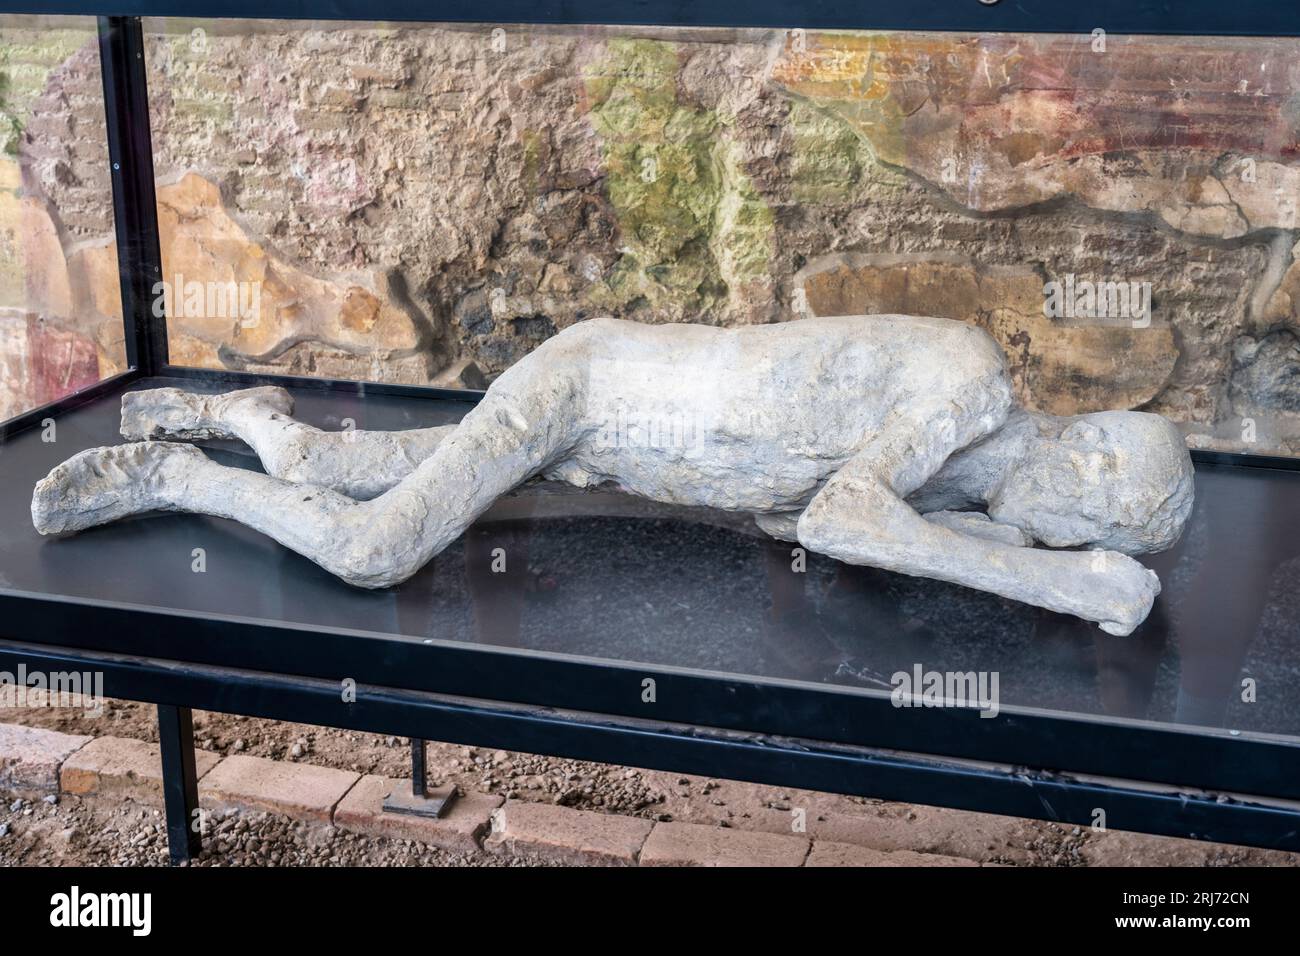 Plaster cast of a victim of the eruption in the Macellum (marketplace) in the ruins of the ancient city of Pompeii in Campania Region, Southern Italy Stock Photo